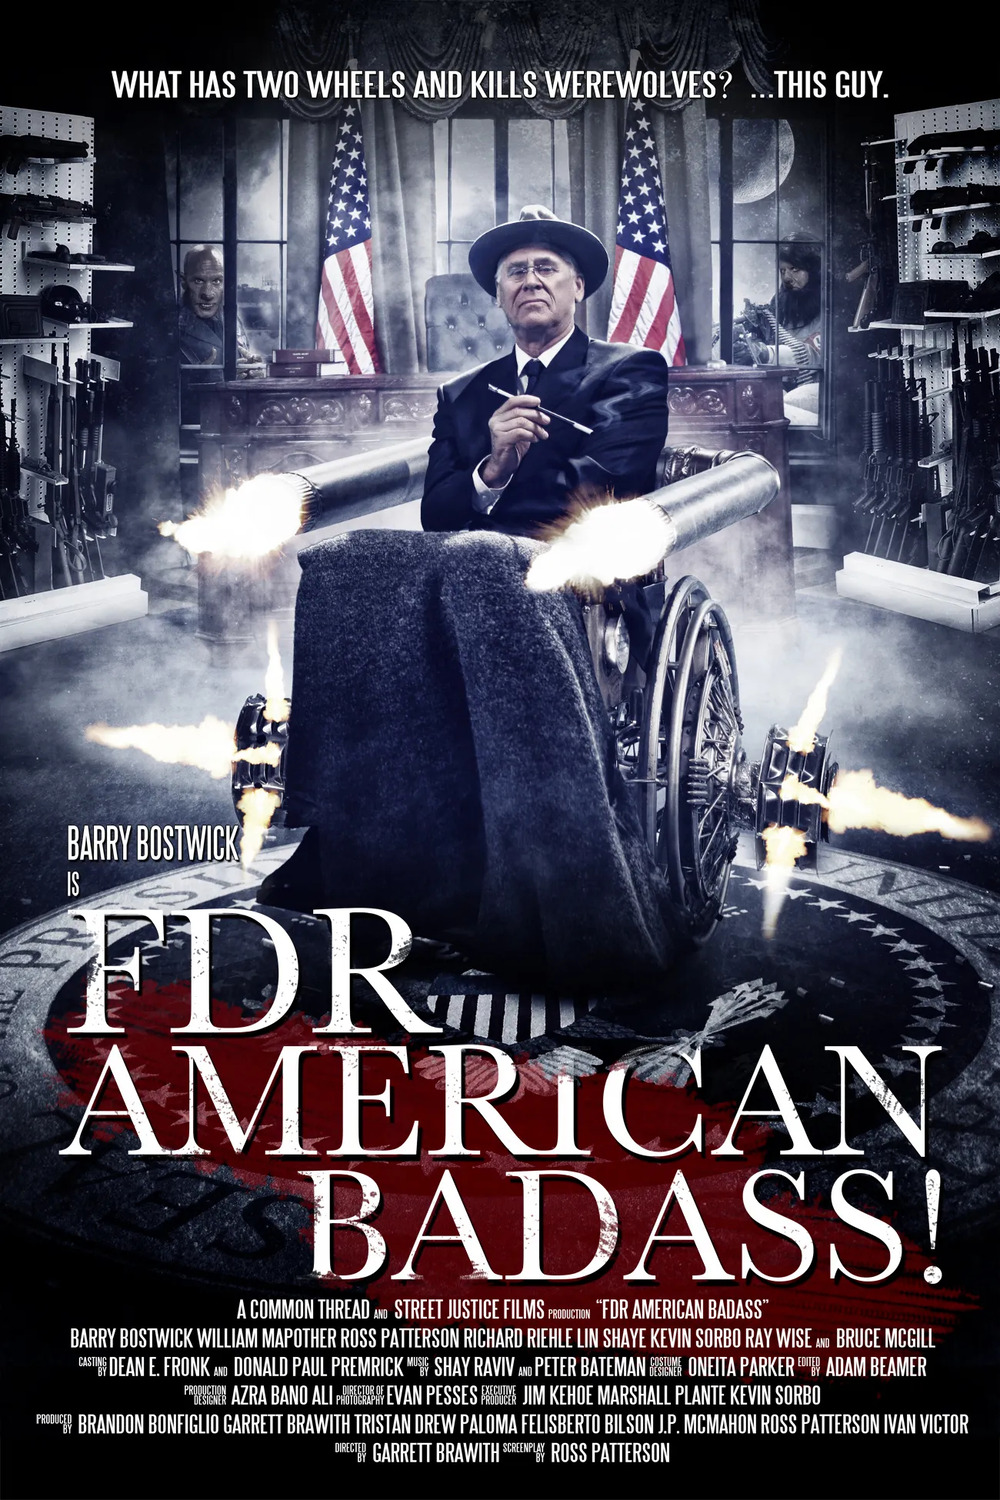 Extra Large Movie Poster Image for FDR: American Badass! 